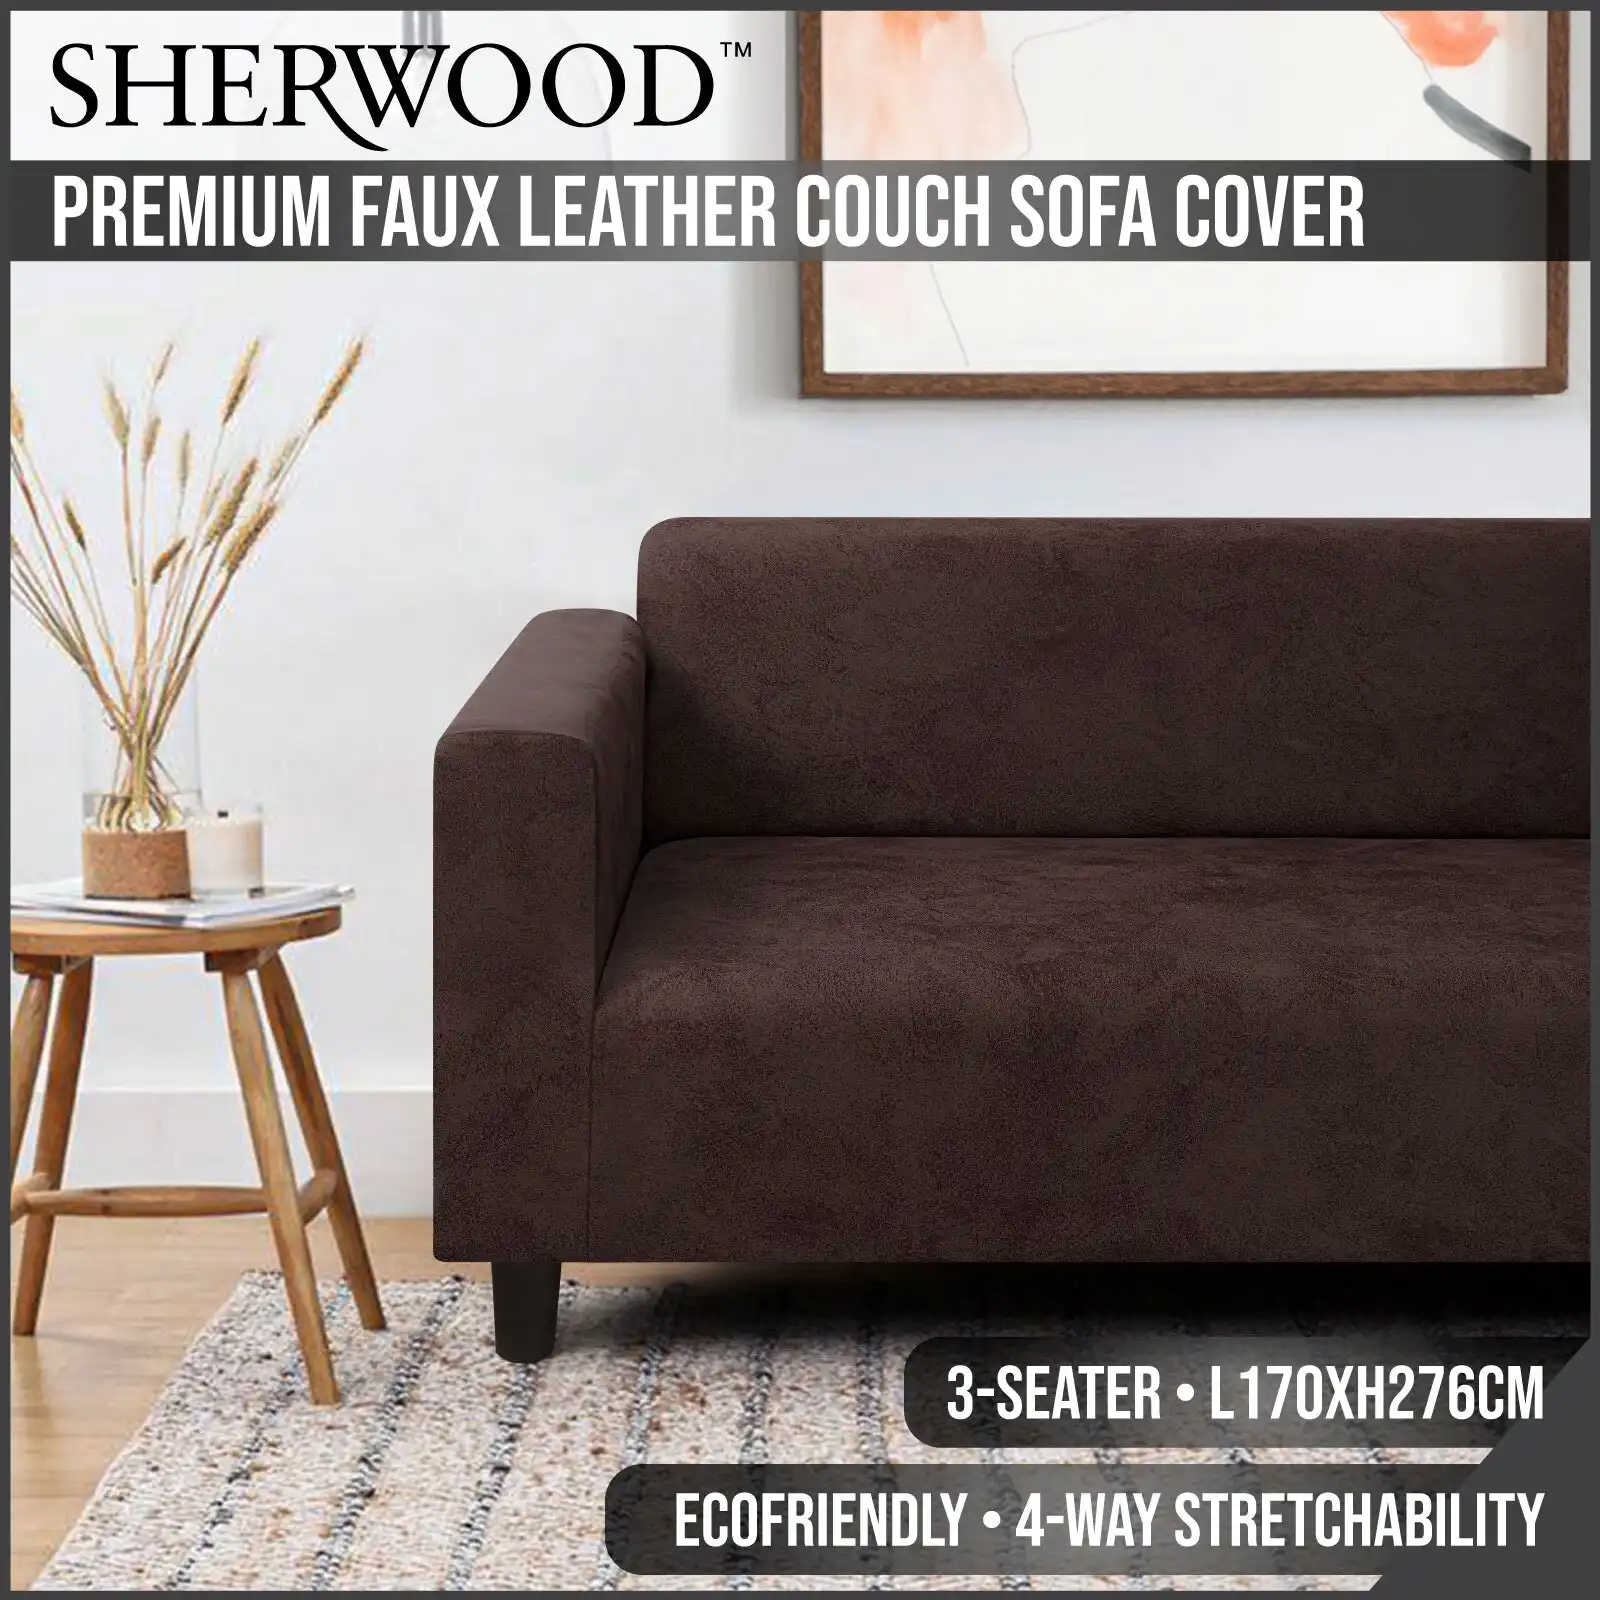 Sherwood Home Premium Faux Leather Dark Brown 3 Seater Couch Sofa Cover